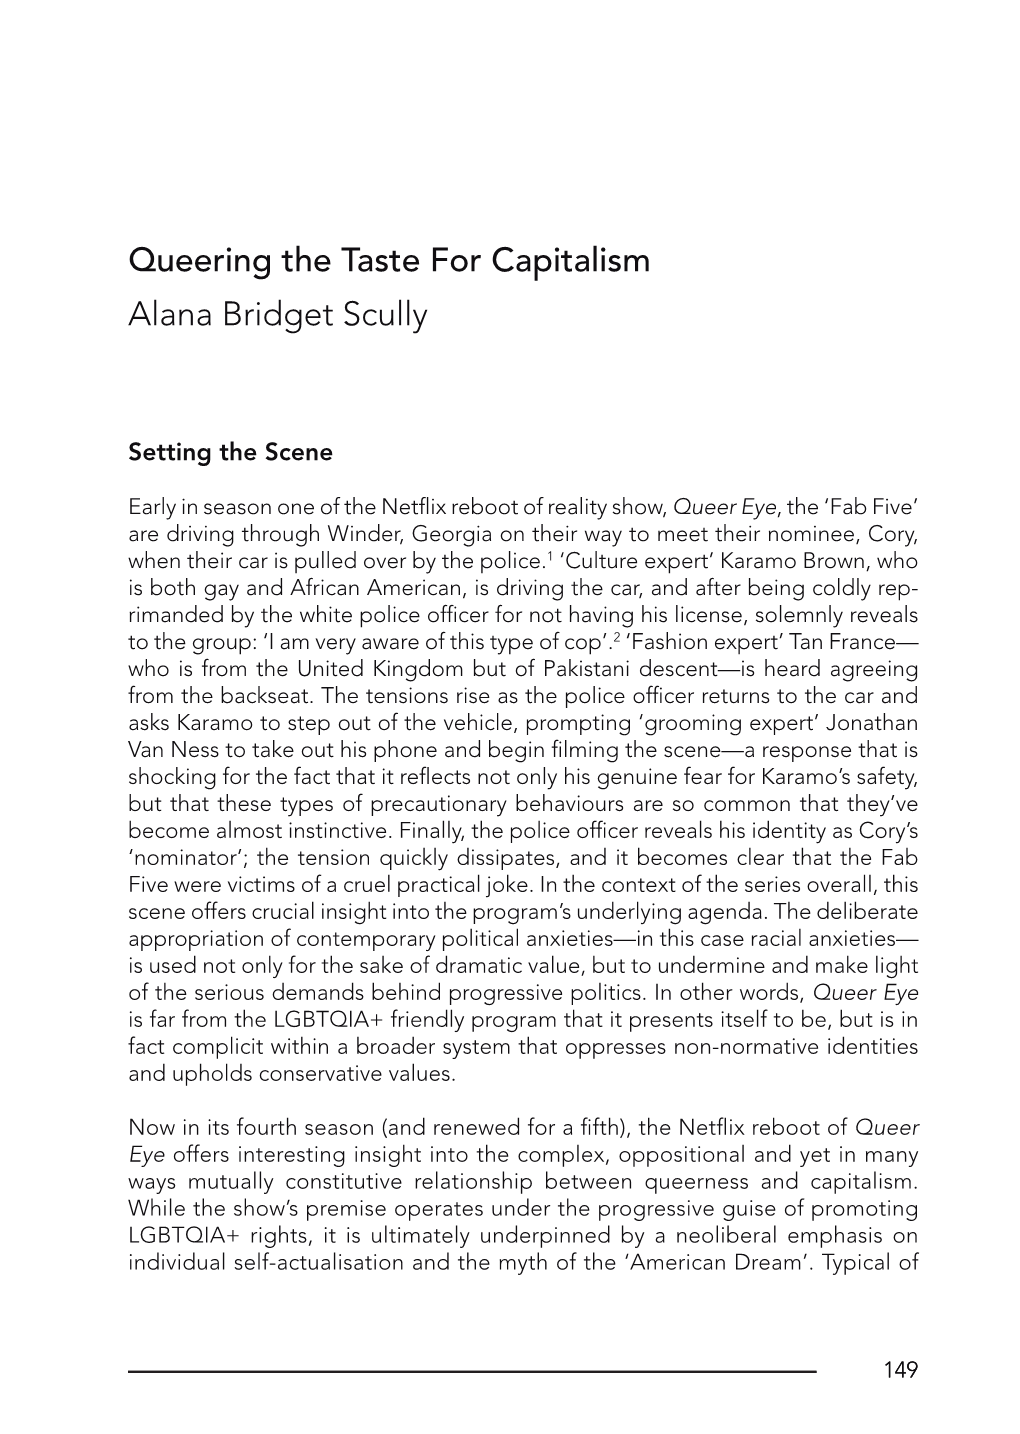 Queering the Taste for Capitalism Alana Bridget Scully